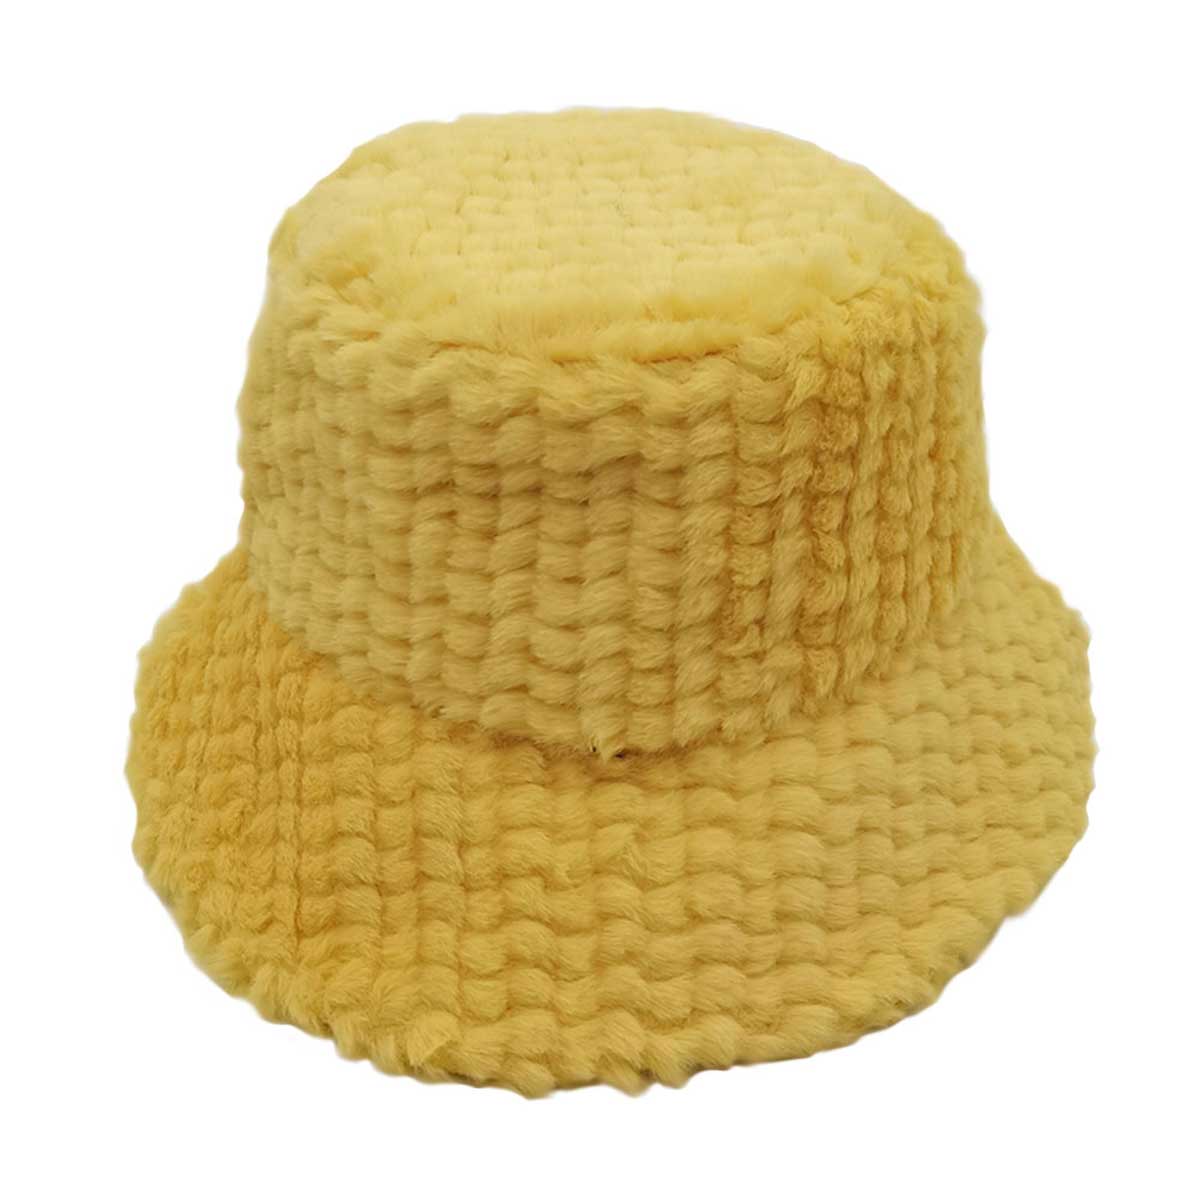 Yellow Fuzzy Faux Fur Bucket Hat, is a beautiful addition to your attire. before running out the door into the cool air, you’ll want to reach for this toasty bucket hat to keep you incredibly warm. Accessorize the fun way with this solid faux fur bucket hat, it's the autumnal touch you need to finish your outfit in style. Awesome winter gift accessory! Perfect Gift Birthday, Christmas, Stocking Stuffer, Secret Santa, Holiday, Anniversary, Valentine's Day, Loved One.